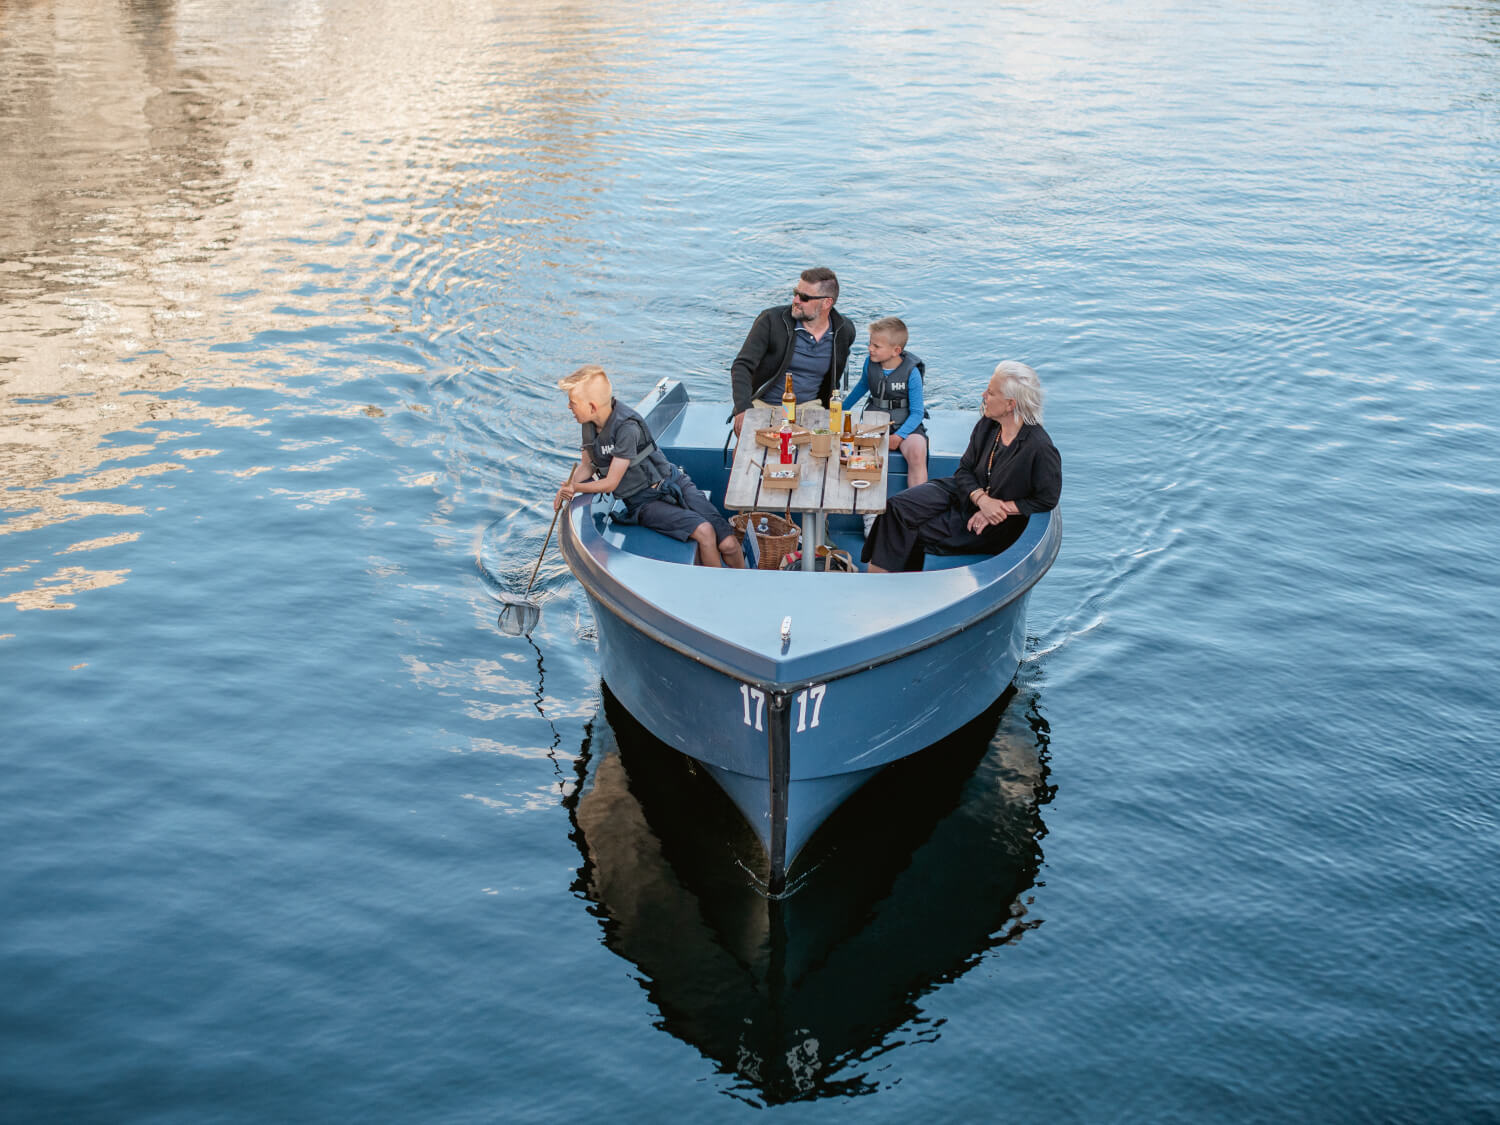 A trip on the water with friends and family. Secure corona